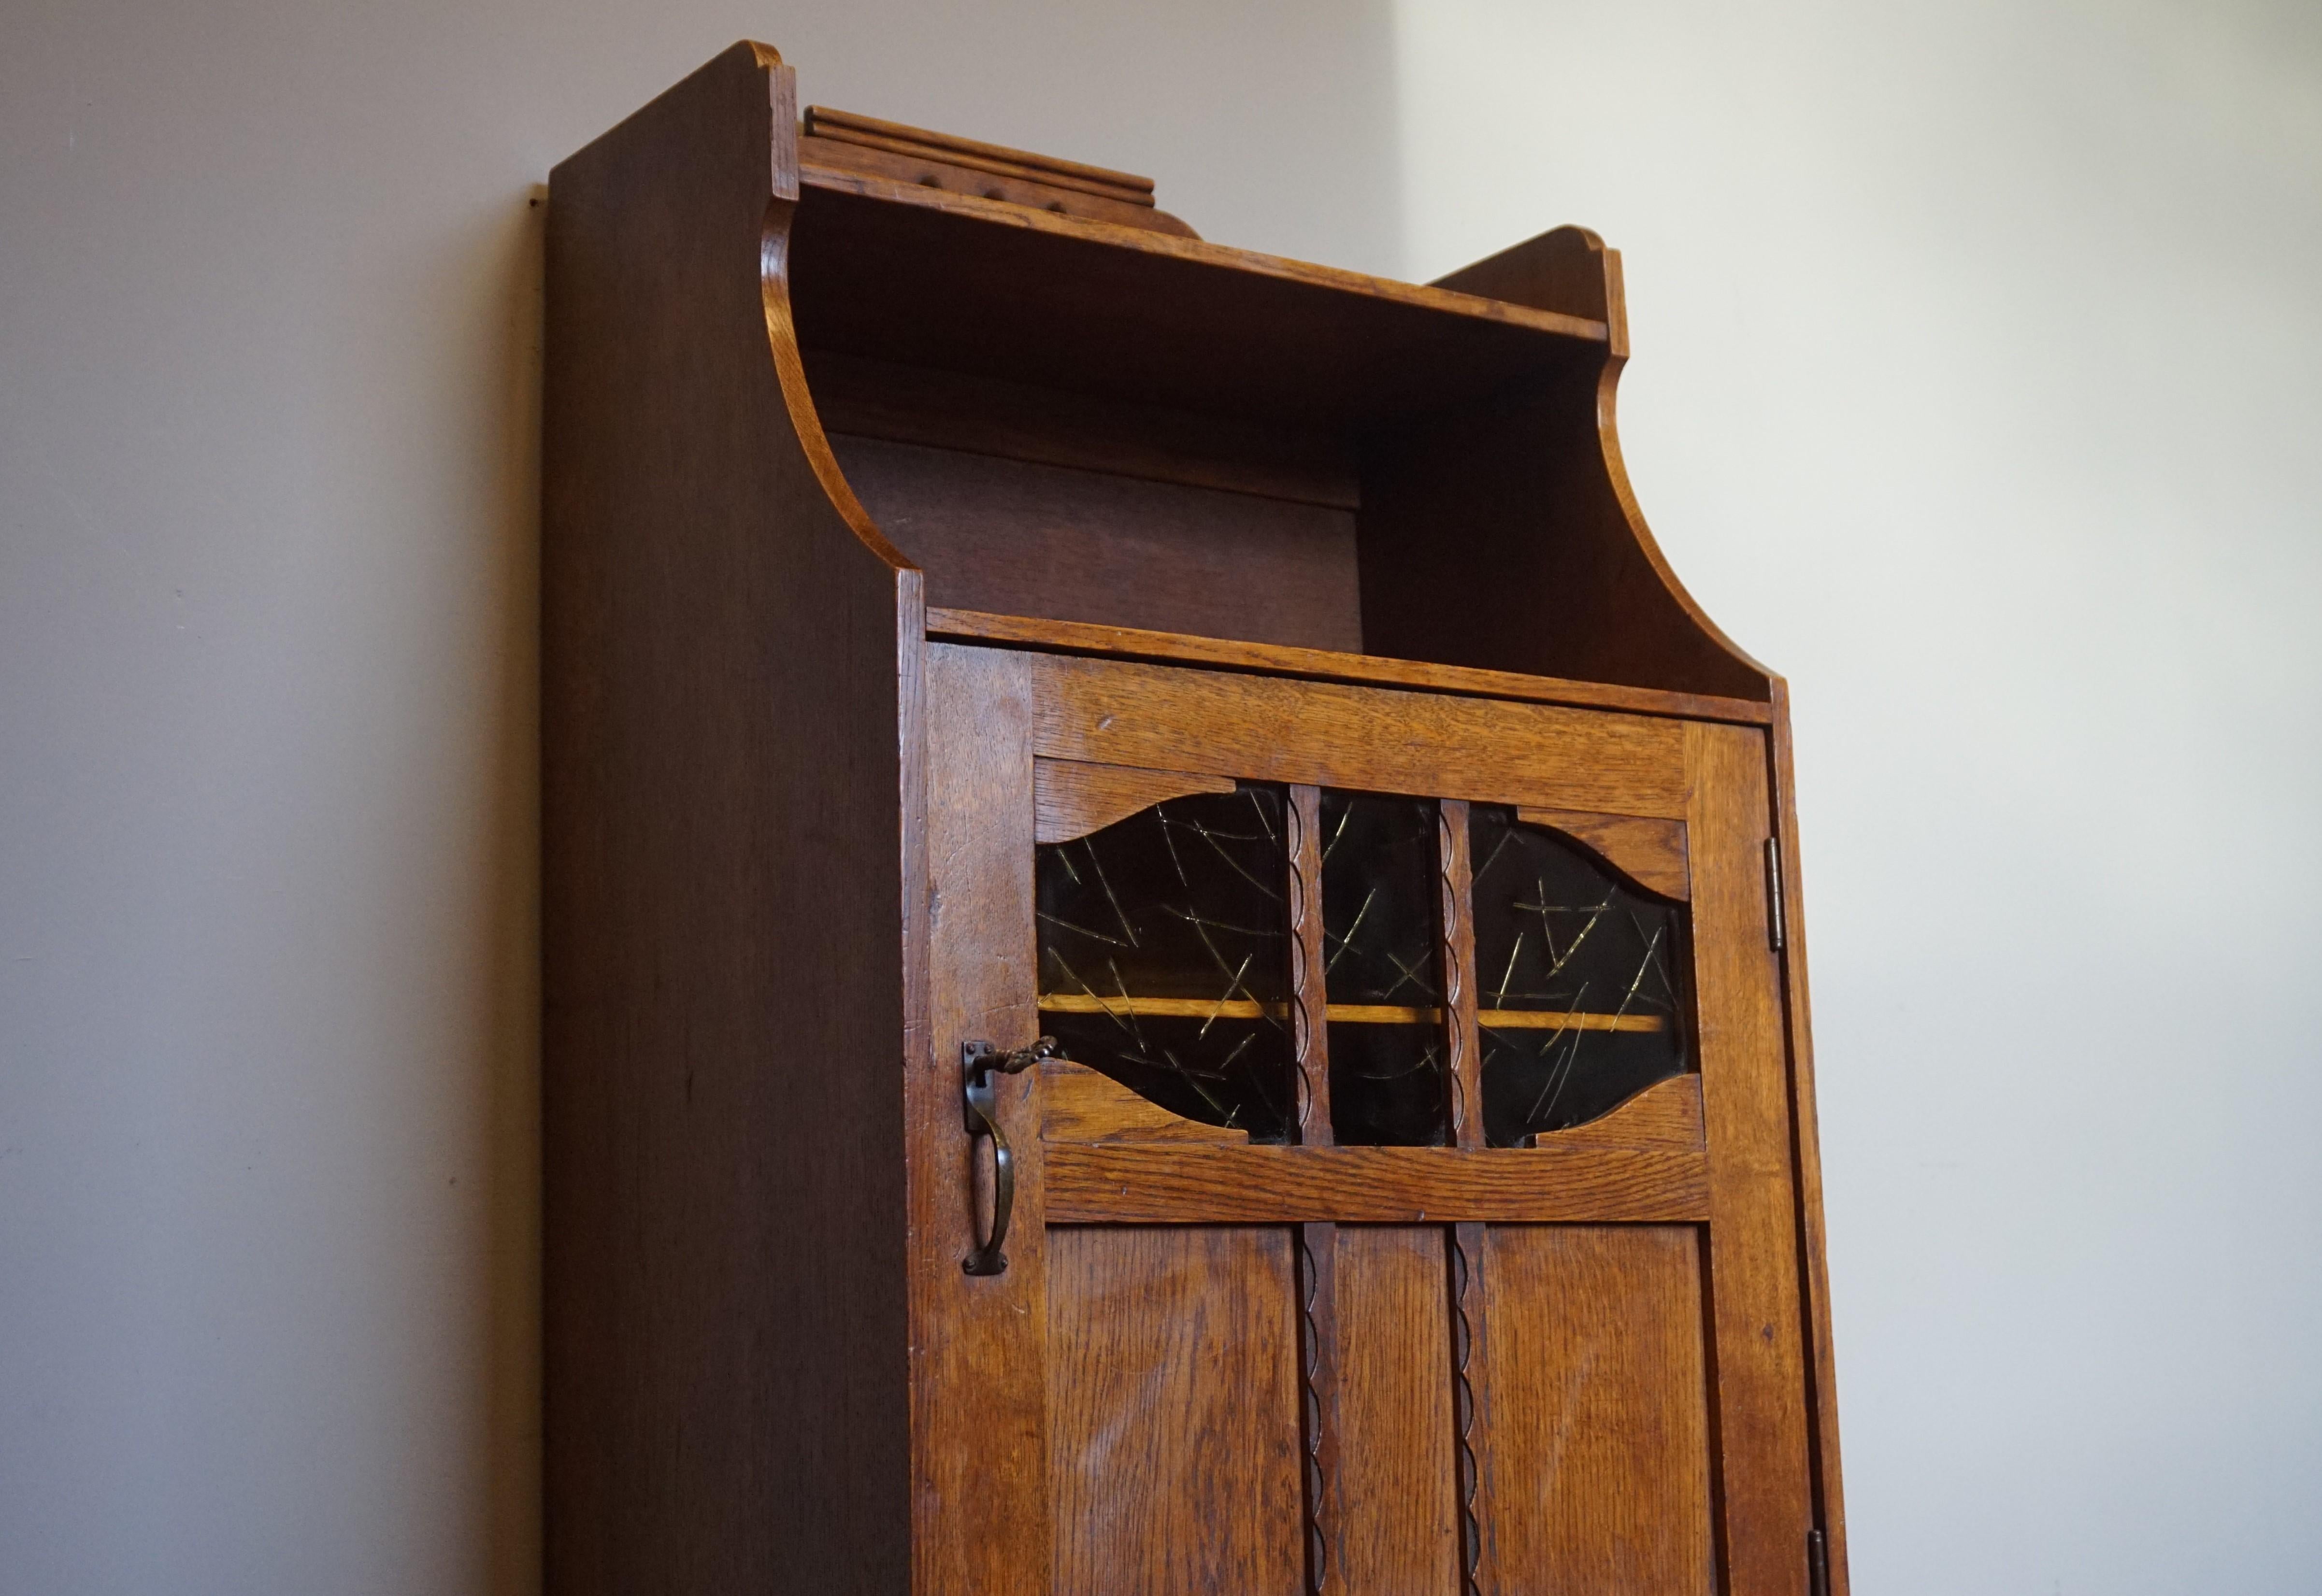 One of a kind, early 1900s small and highly practical, multi-purpose cabinet.

This stunning little Arts & Crafts cabinet showcases the beauty of early 20th century European workmanship and its good condition is like an ode to its maker. Former